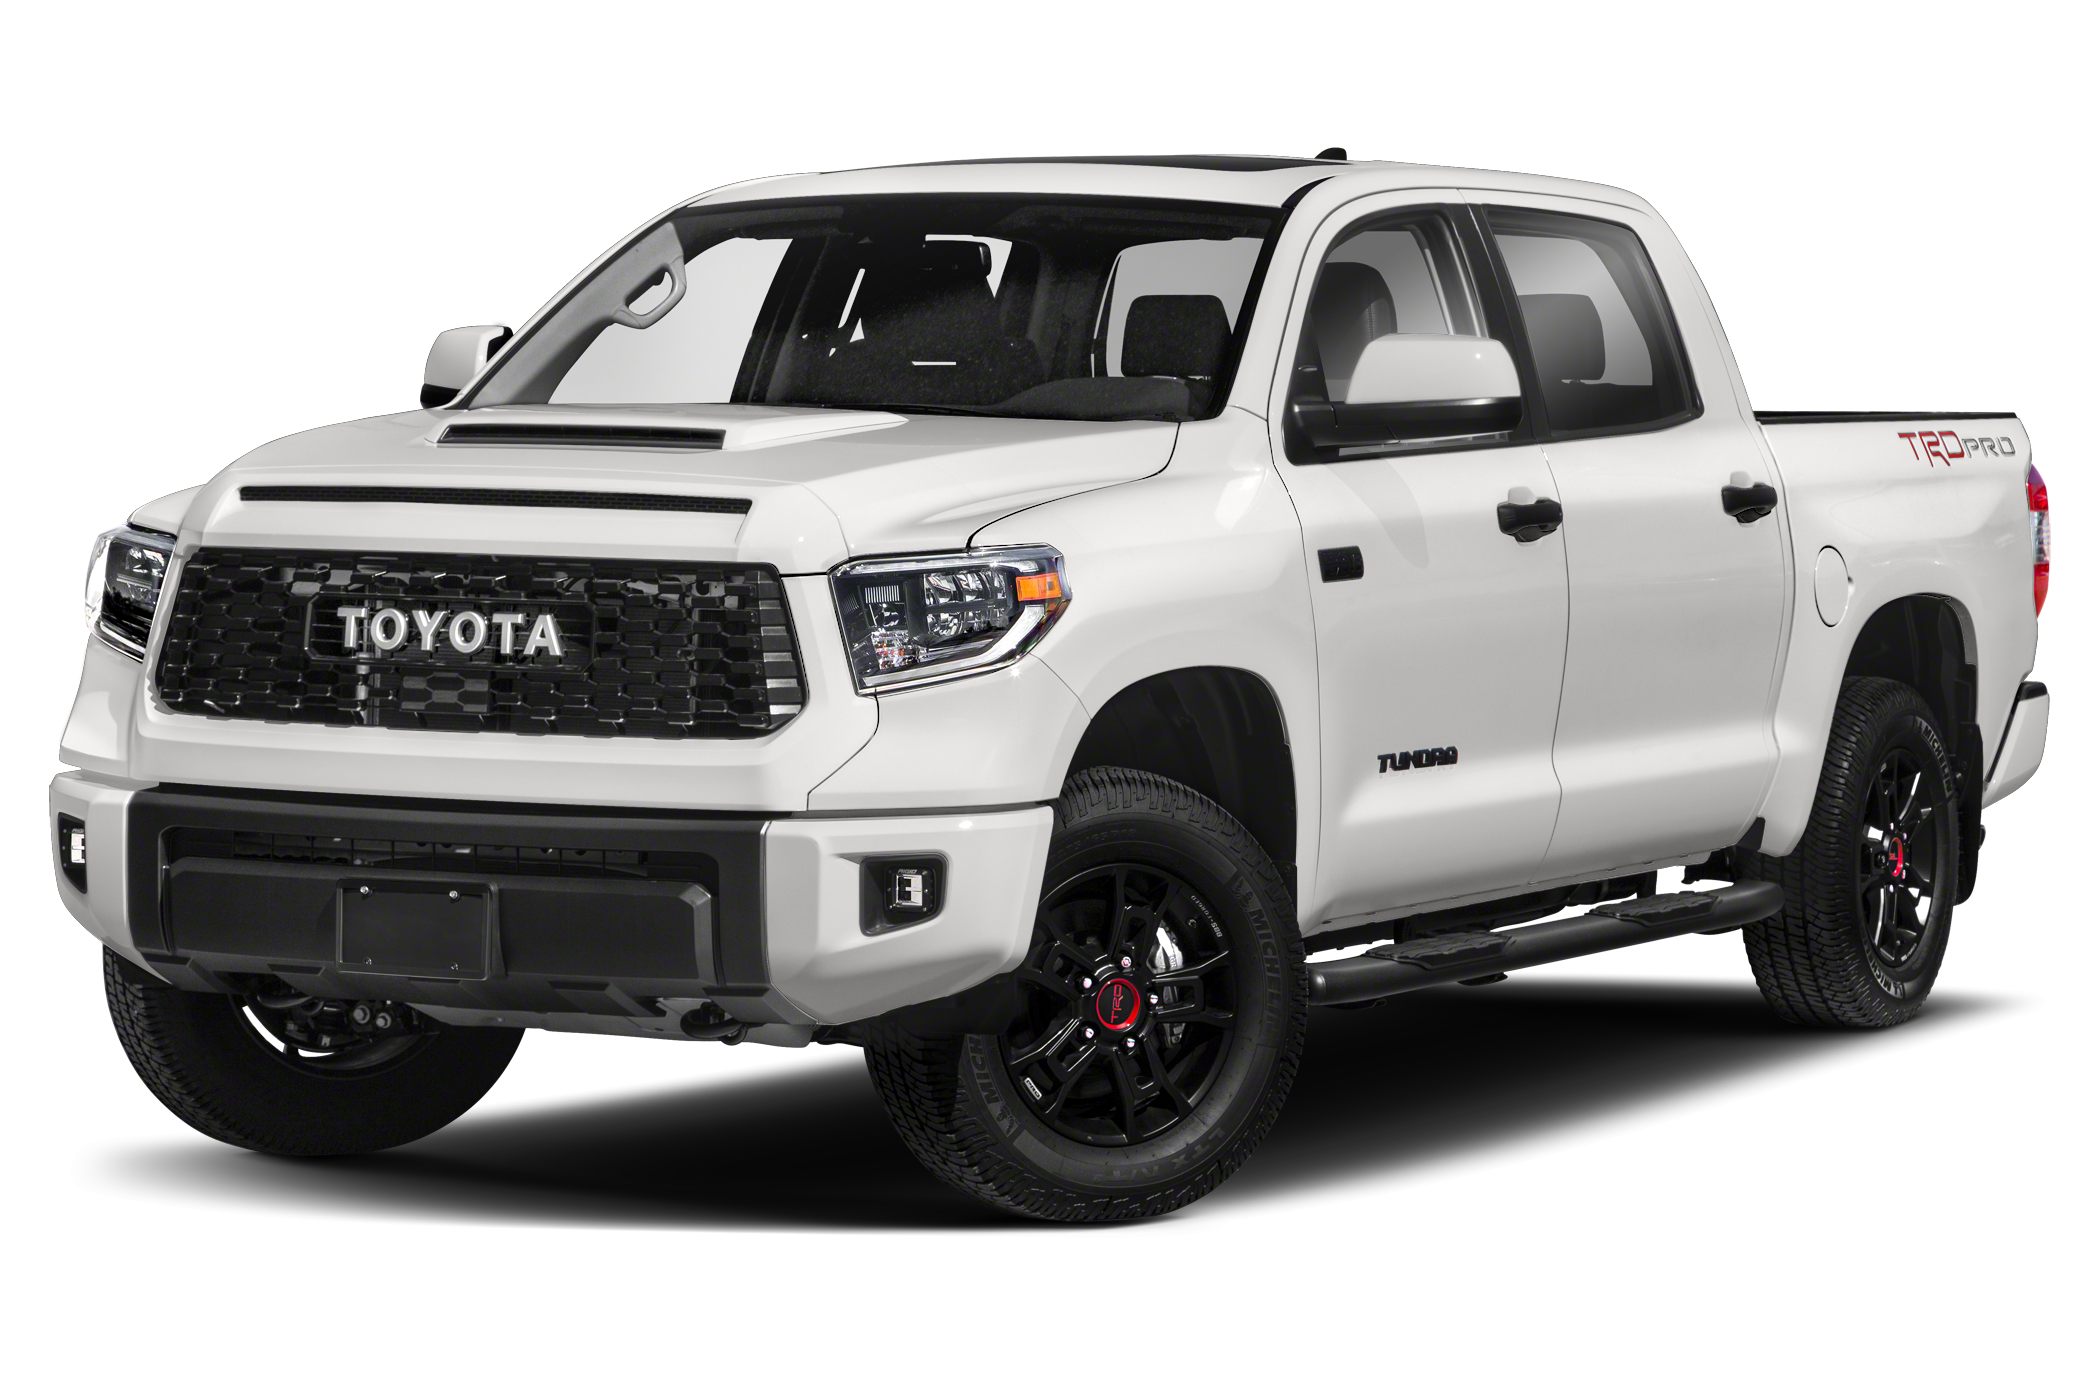 2020 Toyota Tacoma oem parts and accessories on sale